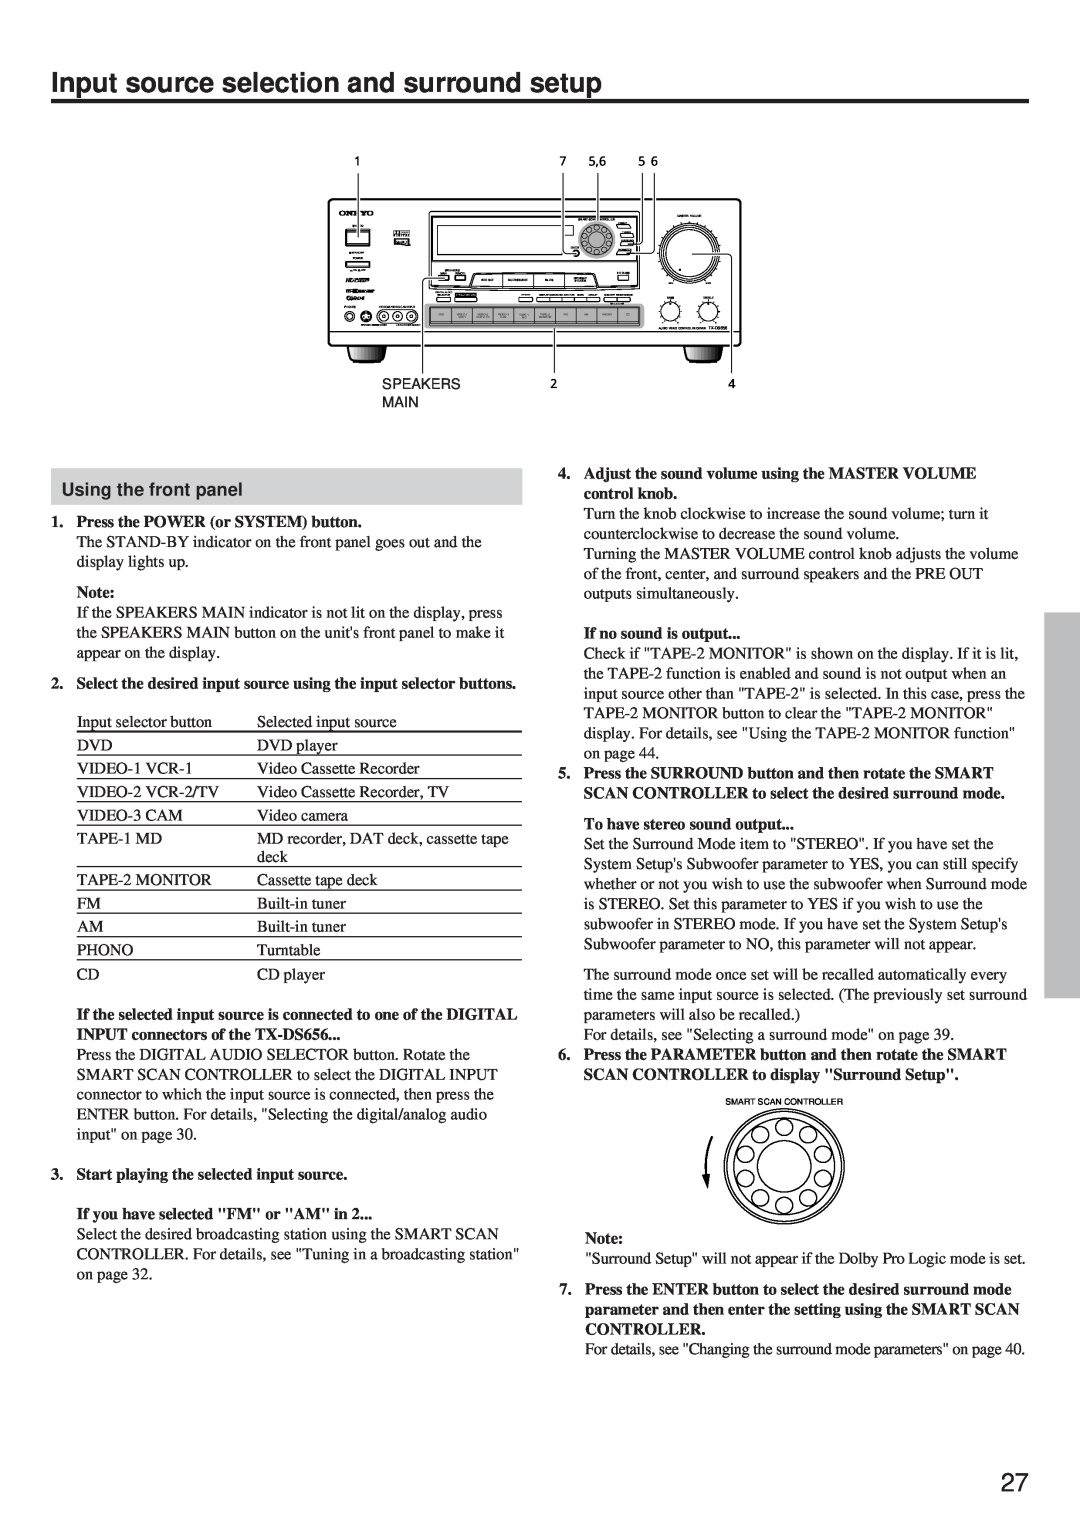 Onkyo TX-DS656 instruction manual Input source selection and surround setup, Using the front panel 